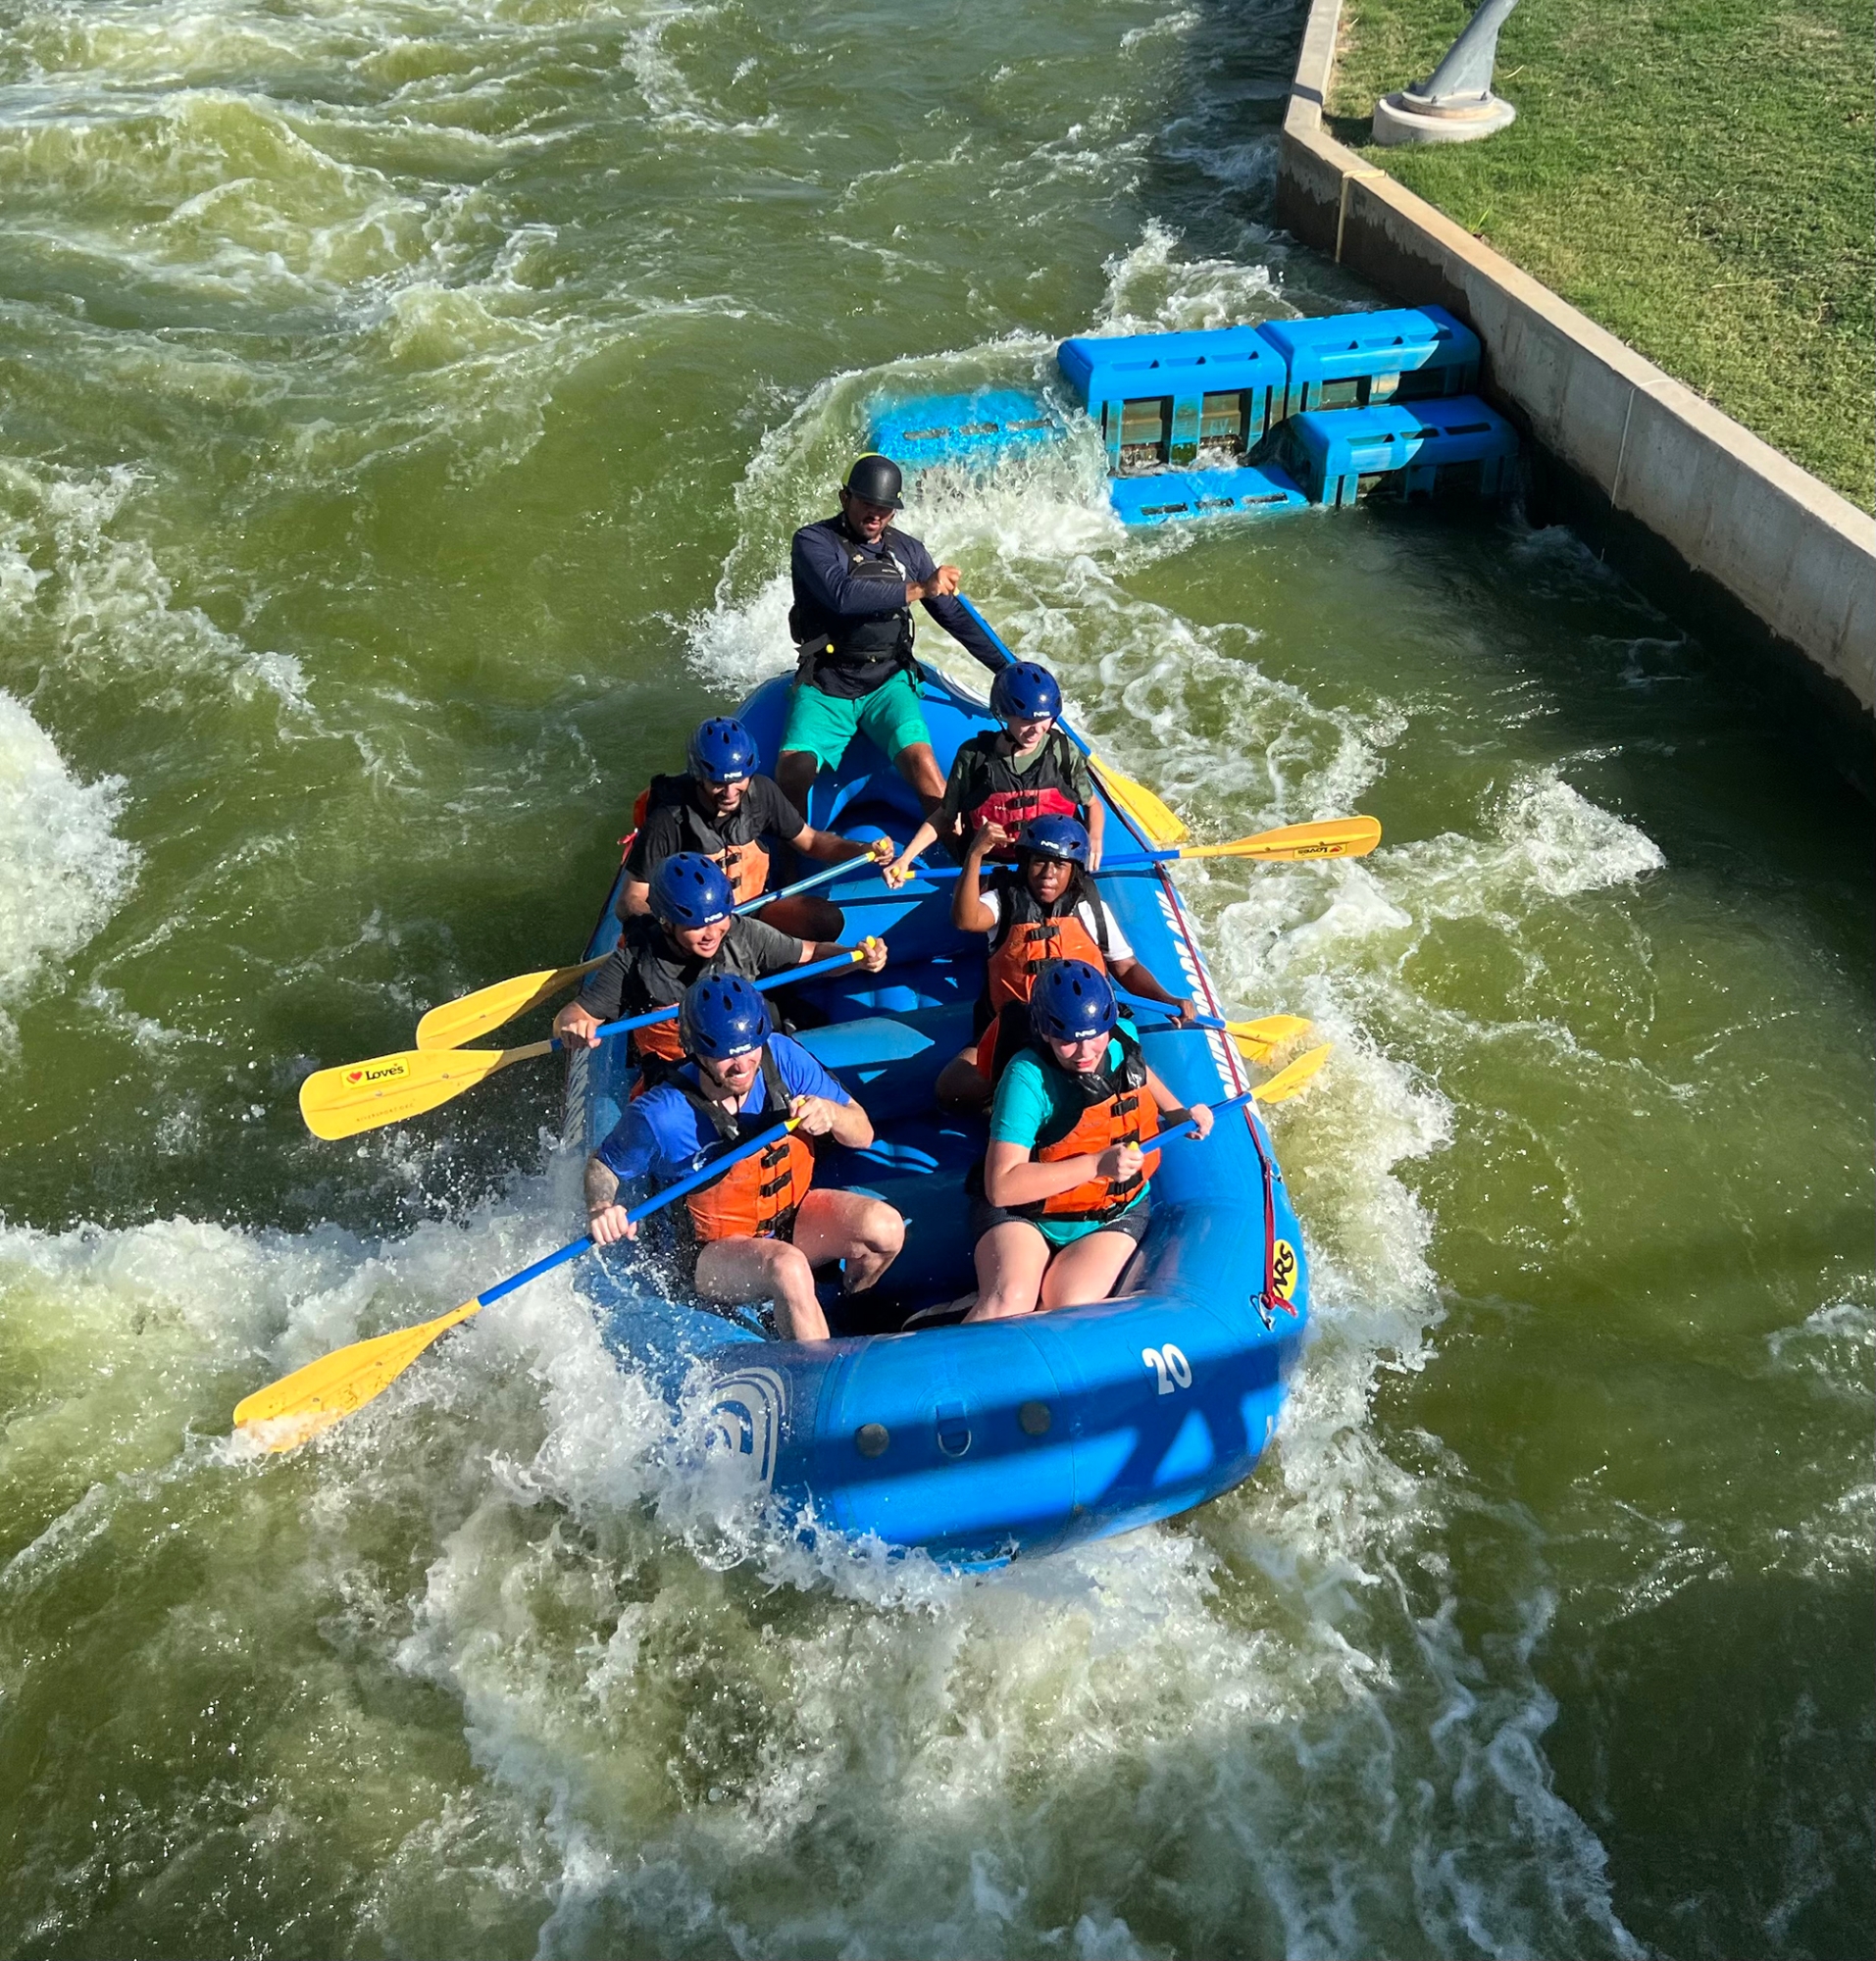 A picture from above looking down at people whitewater rafting in a blue boat